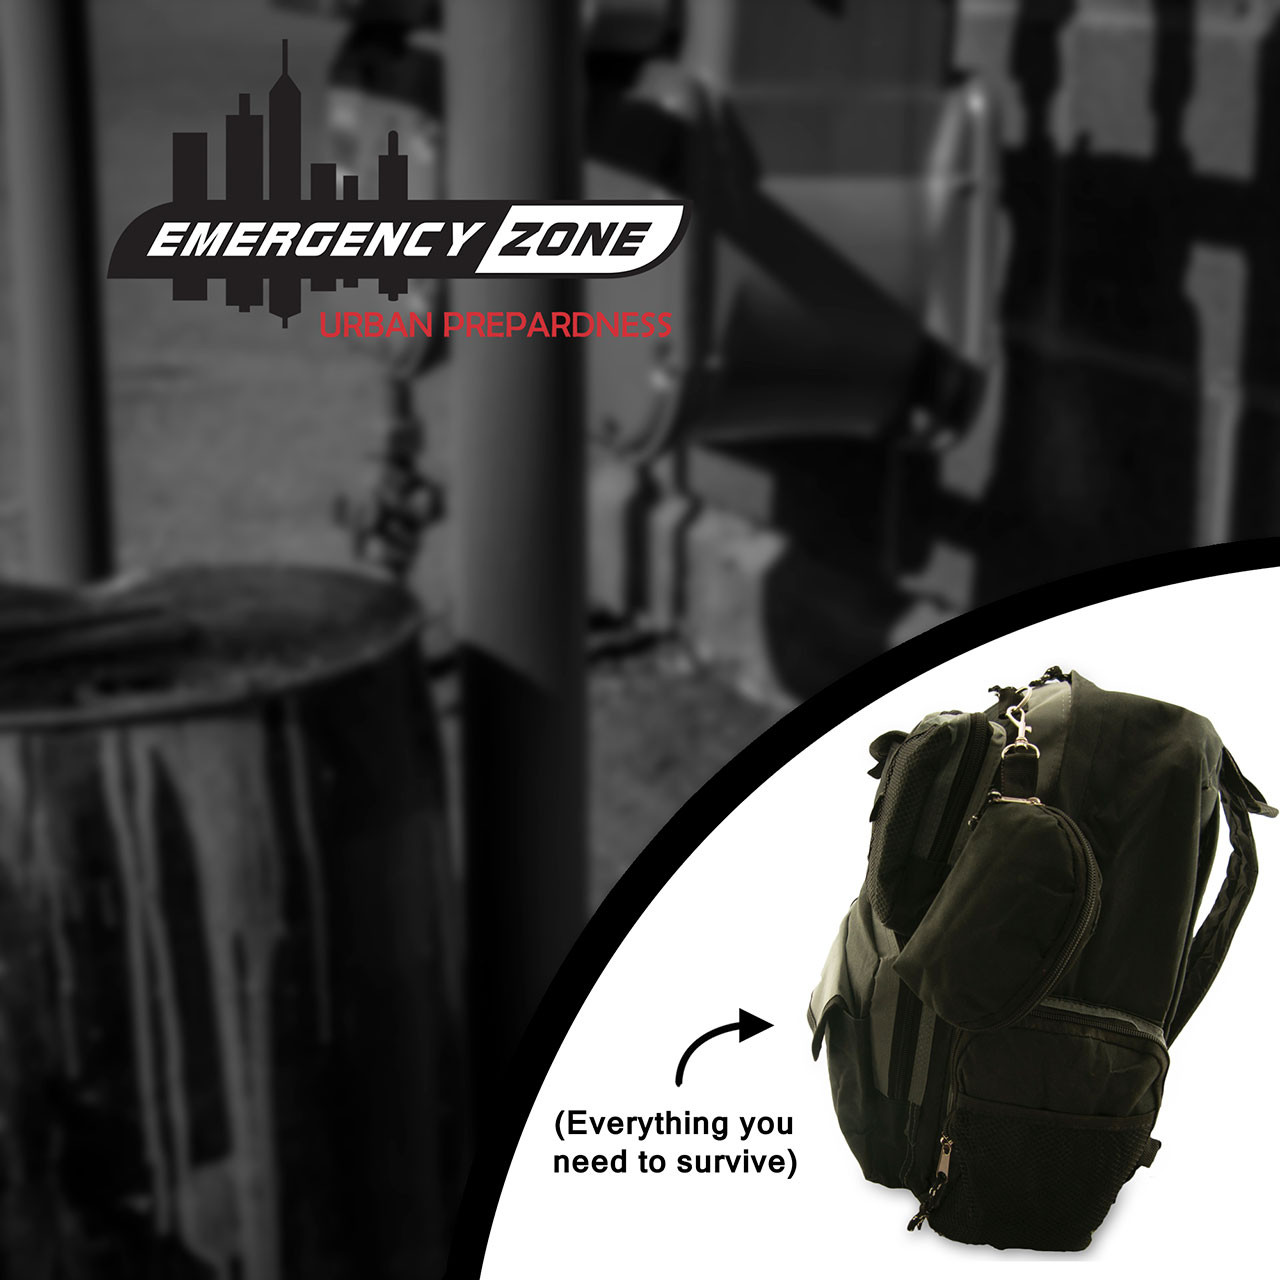 Emergency Zone Urban Survival Bug Out/Go Bag 72-Hour Kit, Perfect Way to  Prepare Your Family